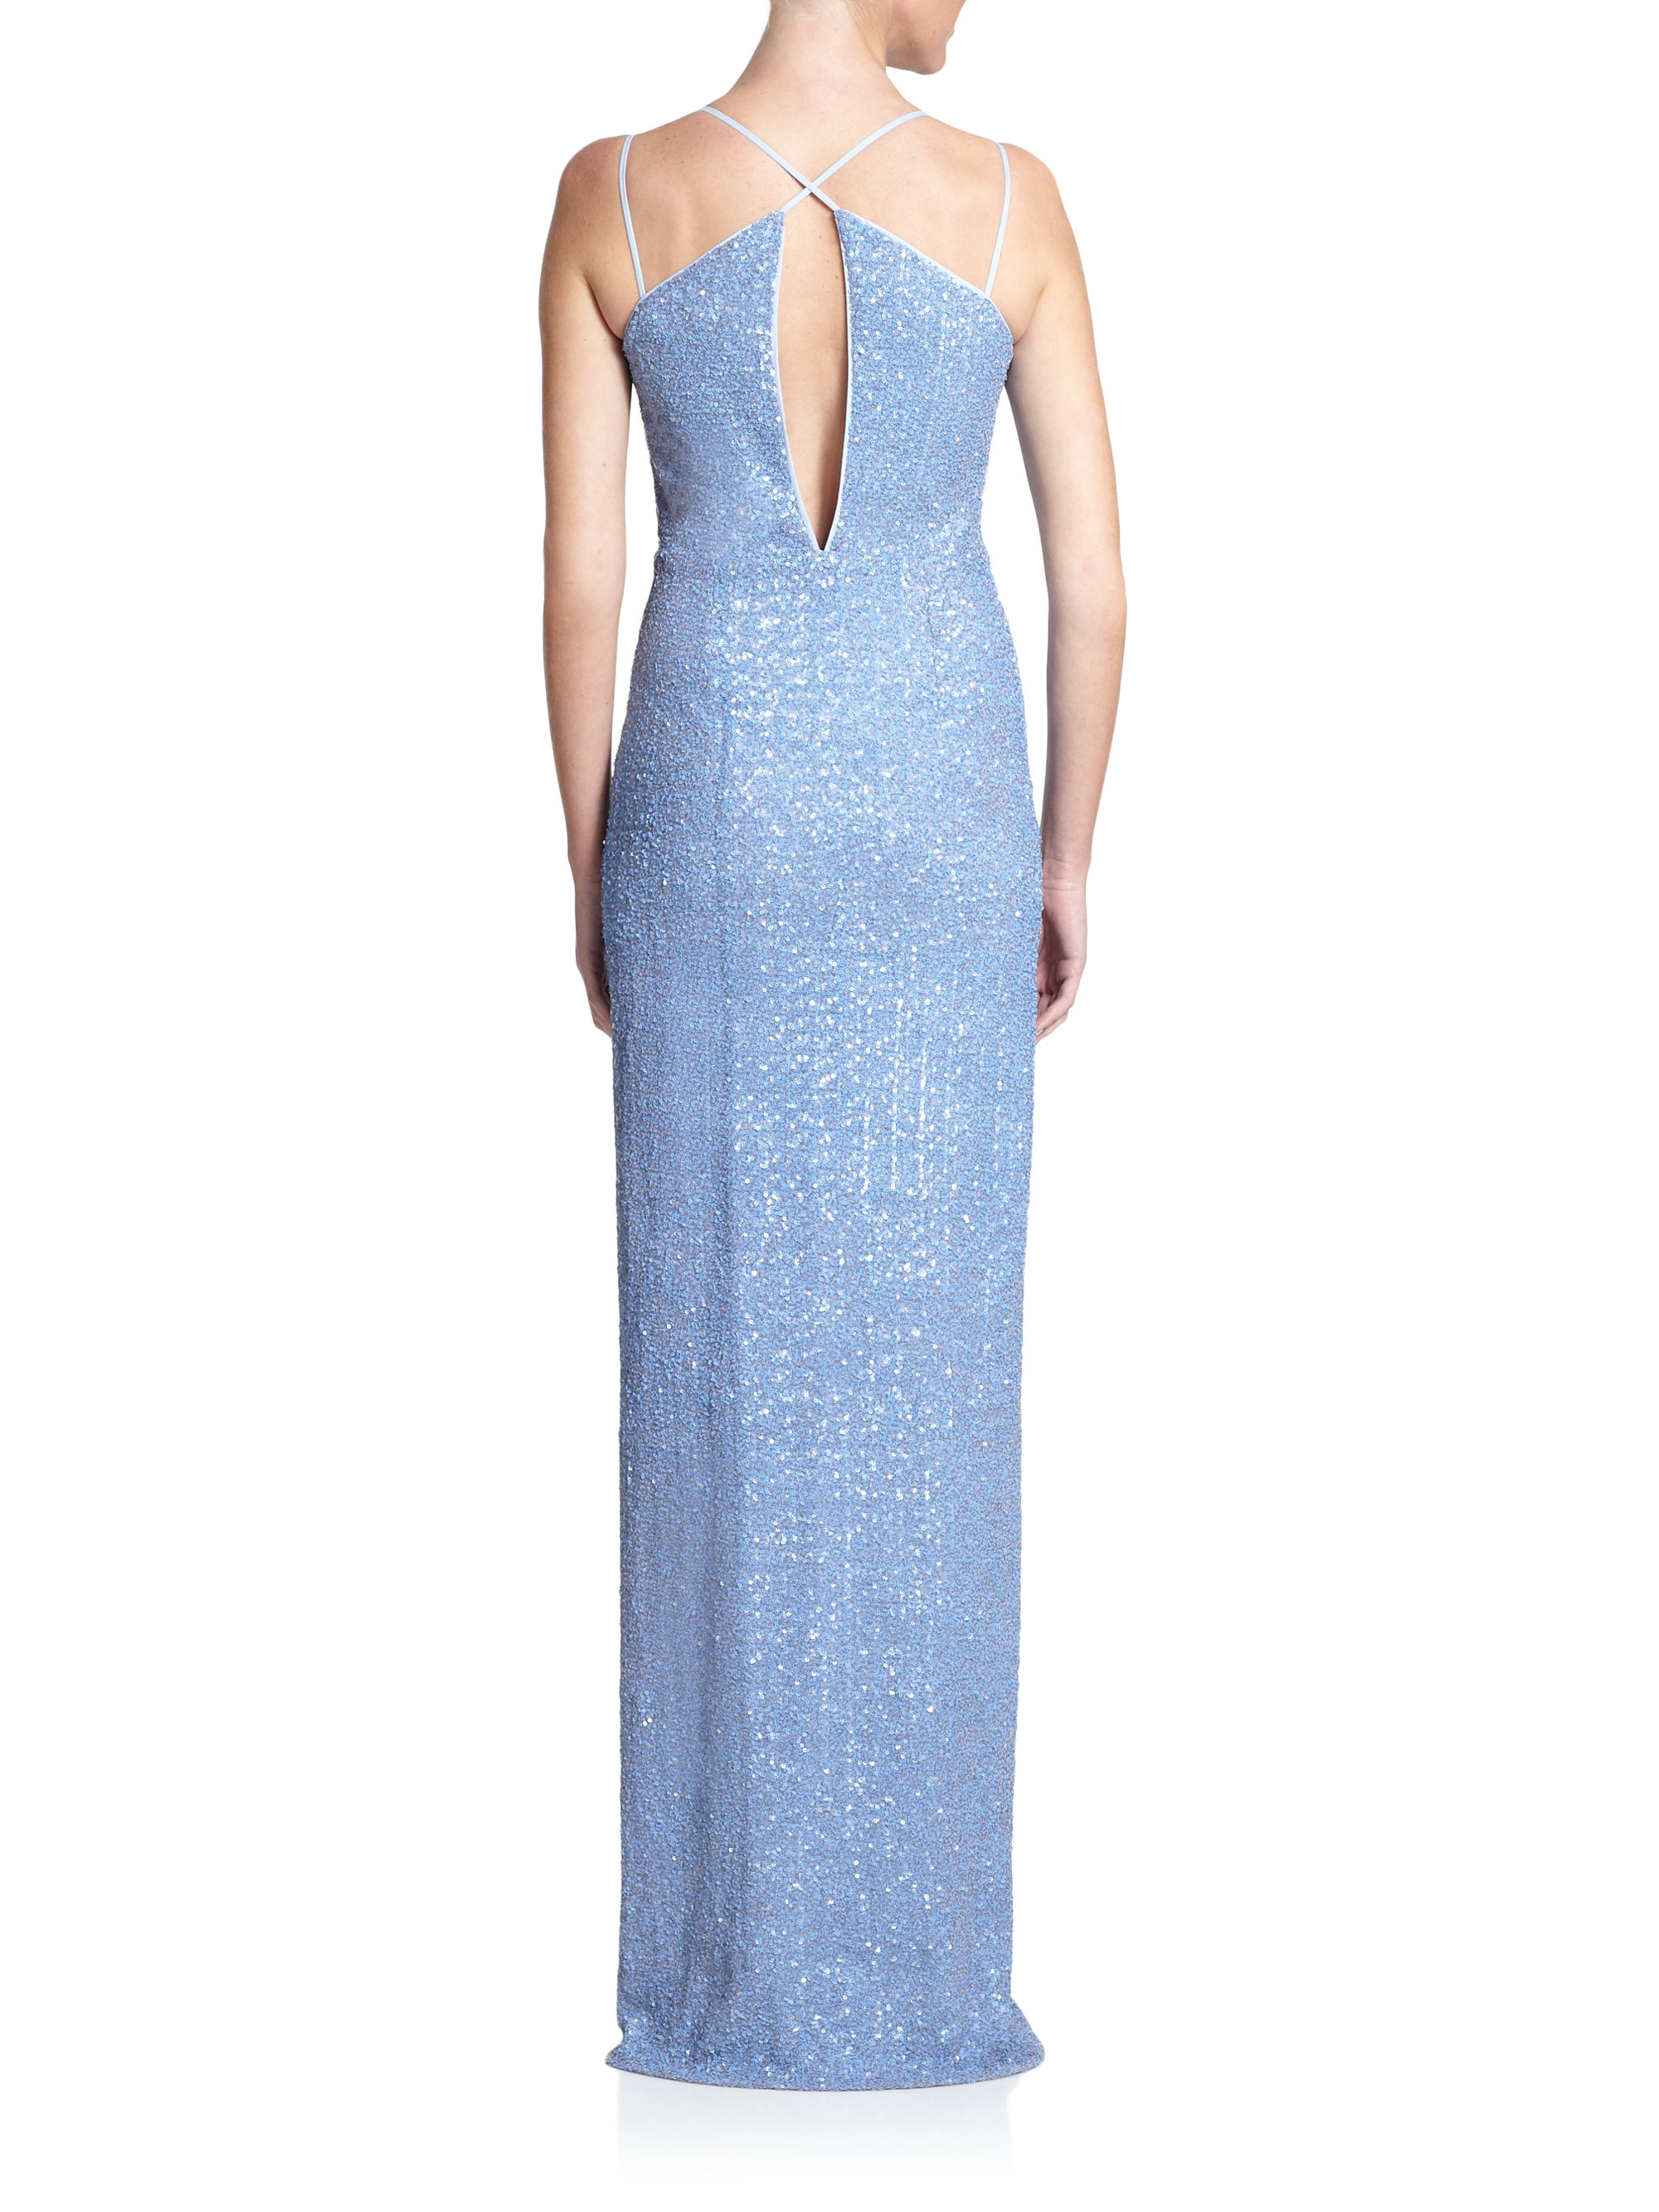 Lyst - Halston Sequined Tulle Gown in Blue